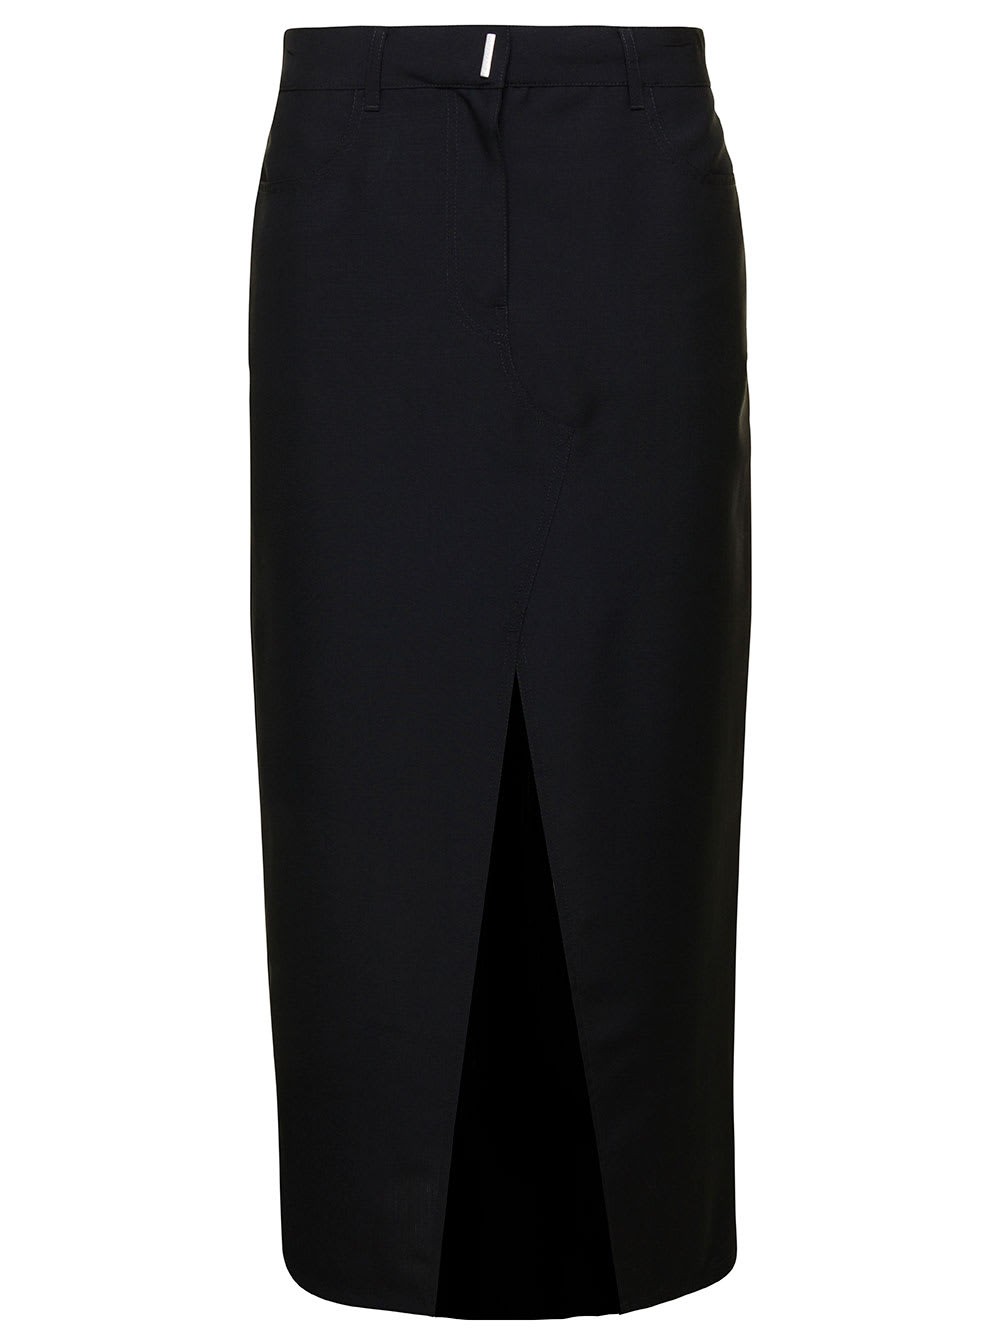 GIVENCHY LONG SKIRT WITH FRONT SPLIT